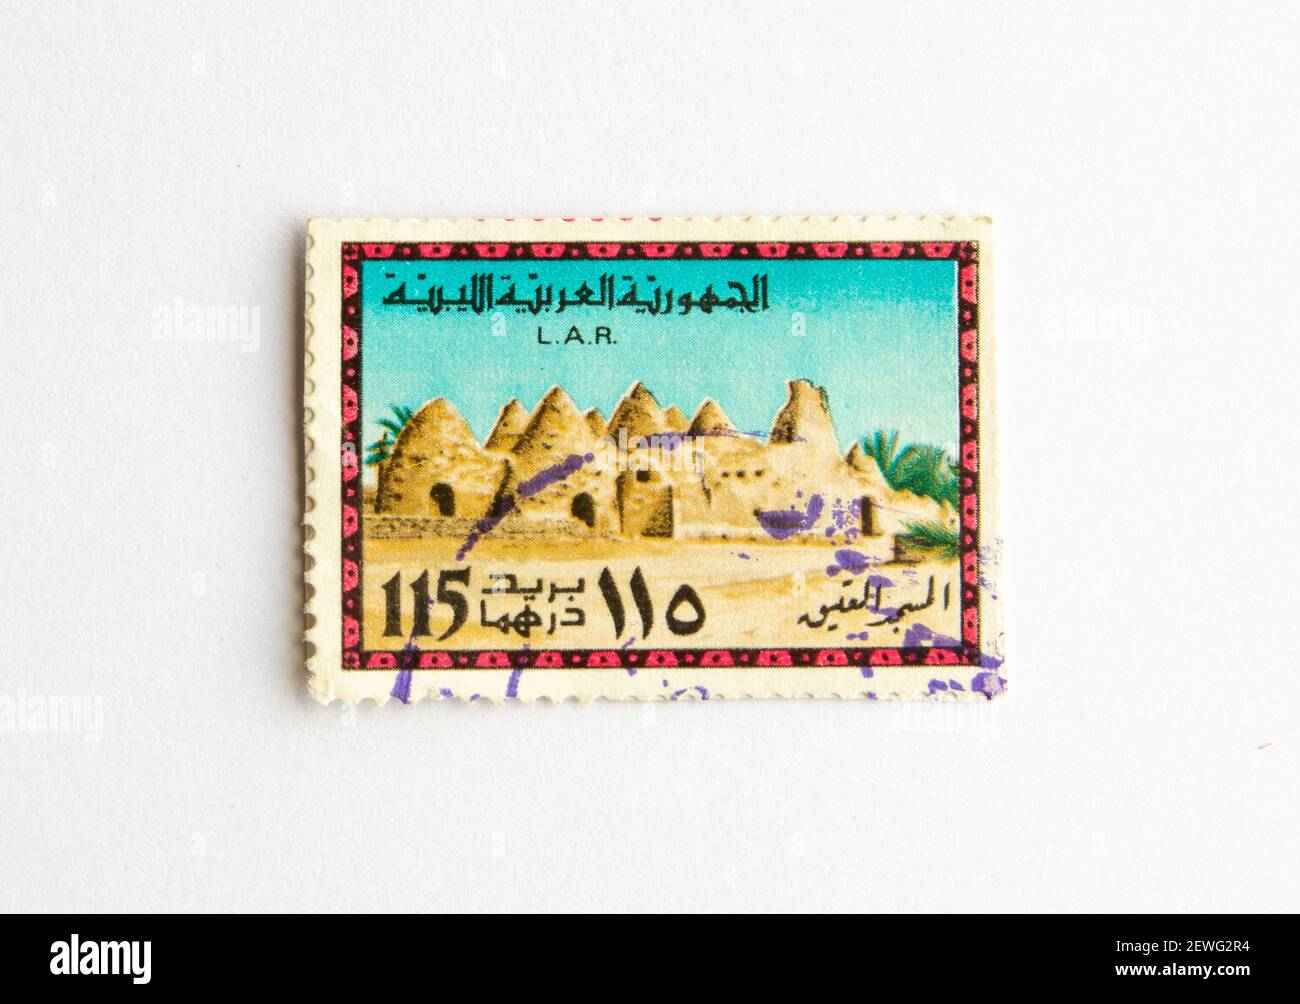 03.03.2021 İstanbul Turkey. Postage Stamp. Cancelled postage stamp printed by Libya, that shows Mosque, circa 1977. Stock Photo